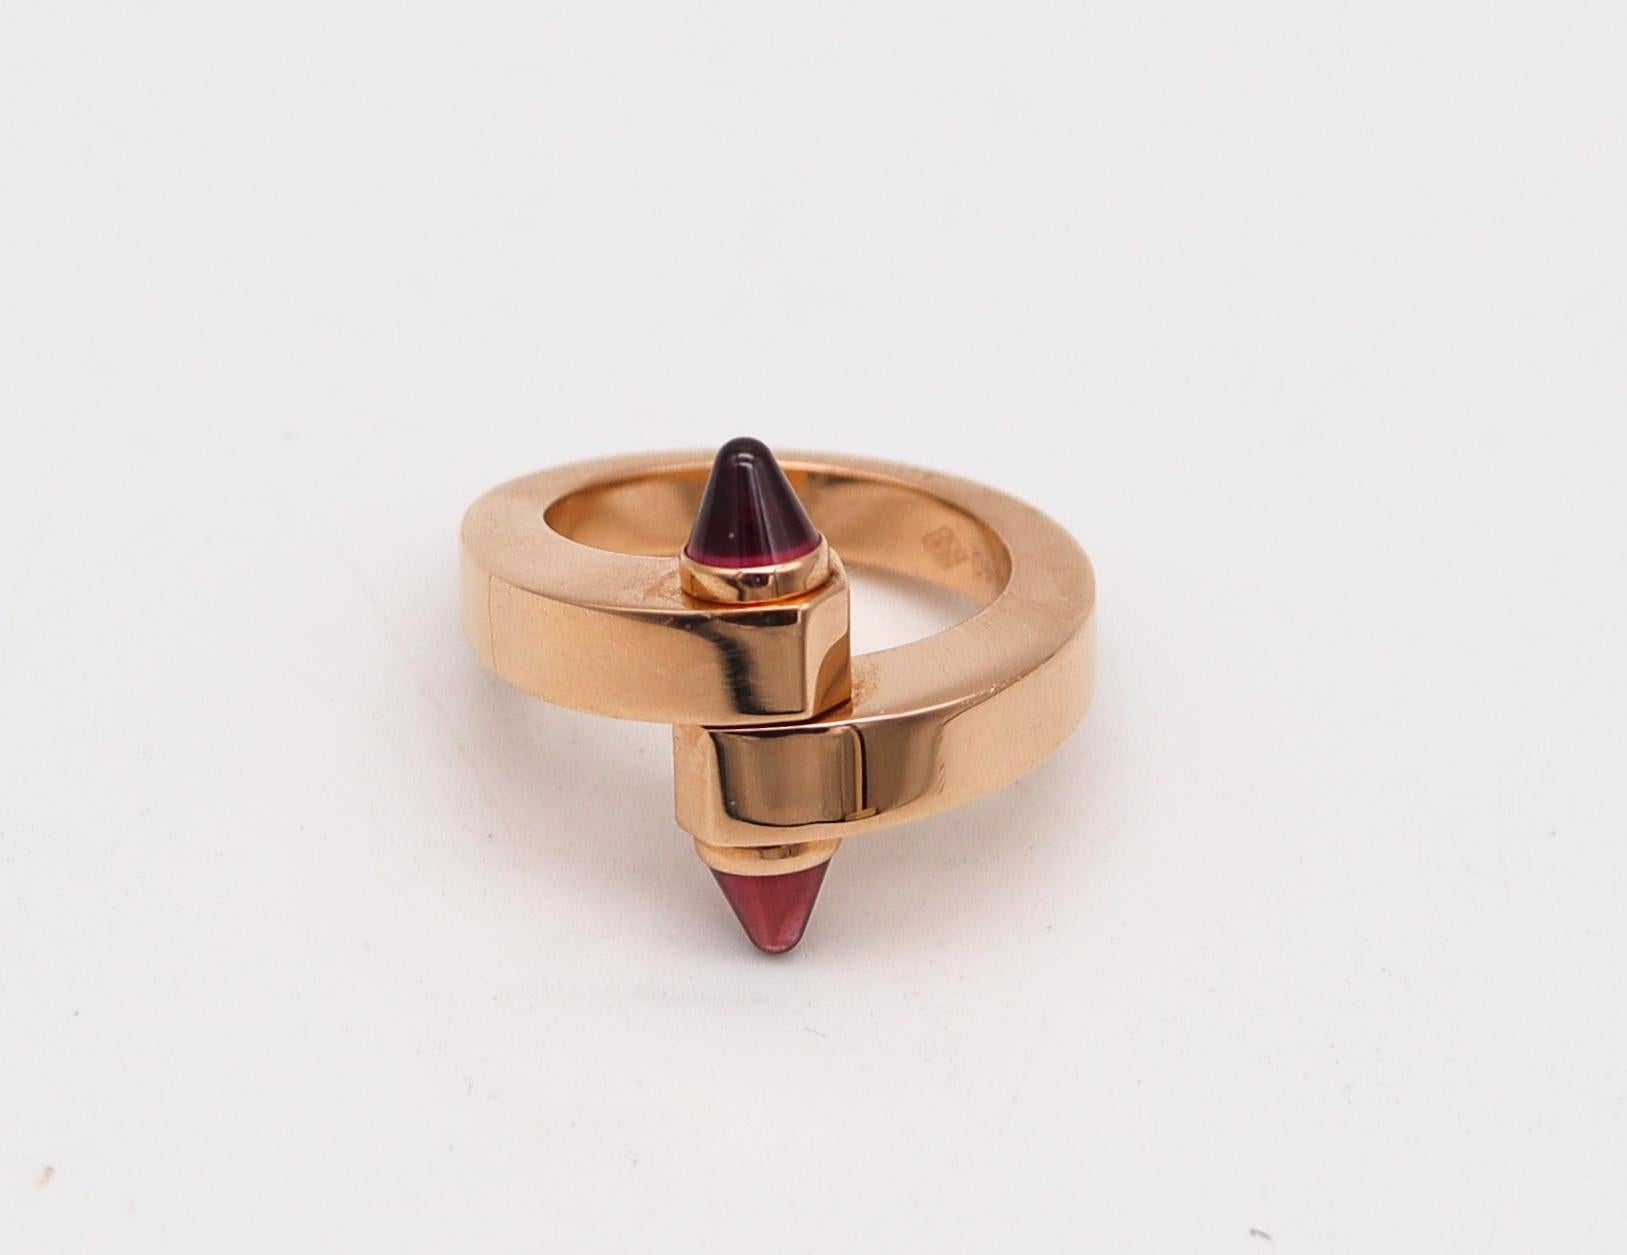 Menotte bypass ring designed by Cartier.

An statement Menotte ring, created in Paris France by the iconic jewelry house of Cartier. This iconic sculptural bypass ring has been crafted with industrial designs patterns in solid rose gold of 18 karats